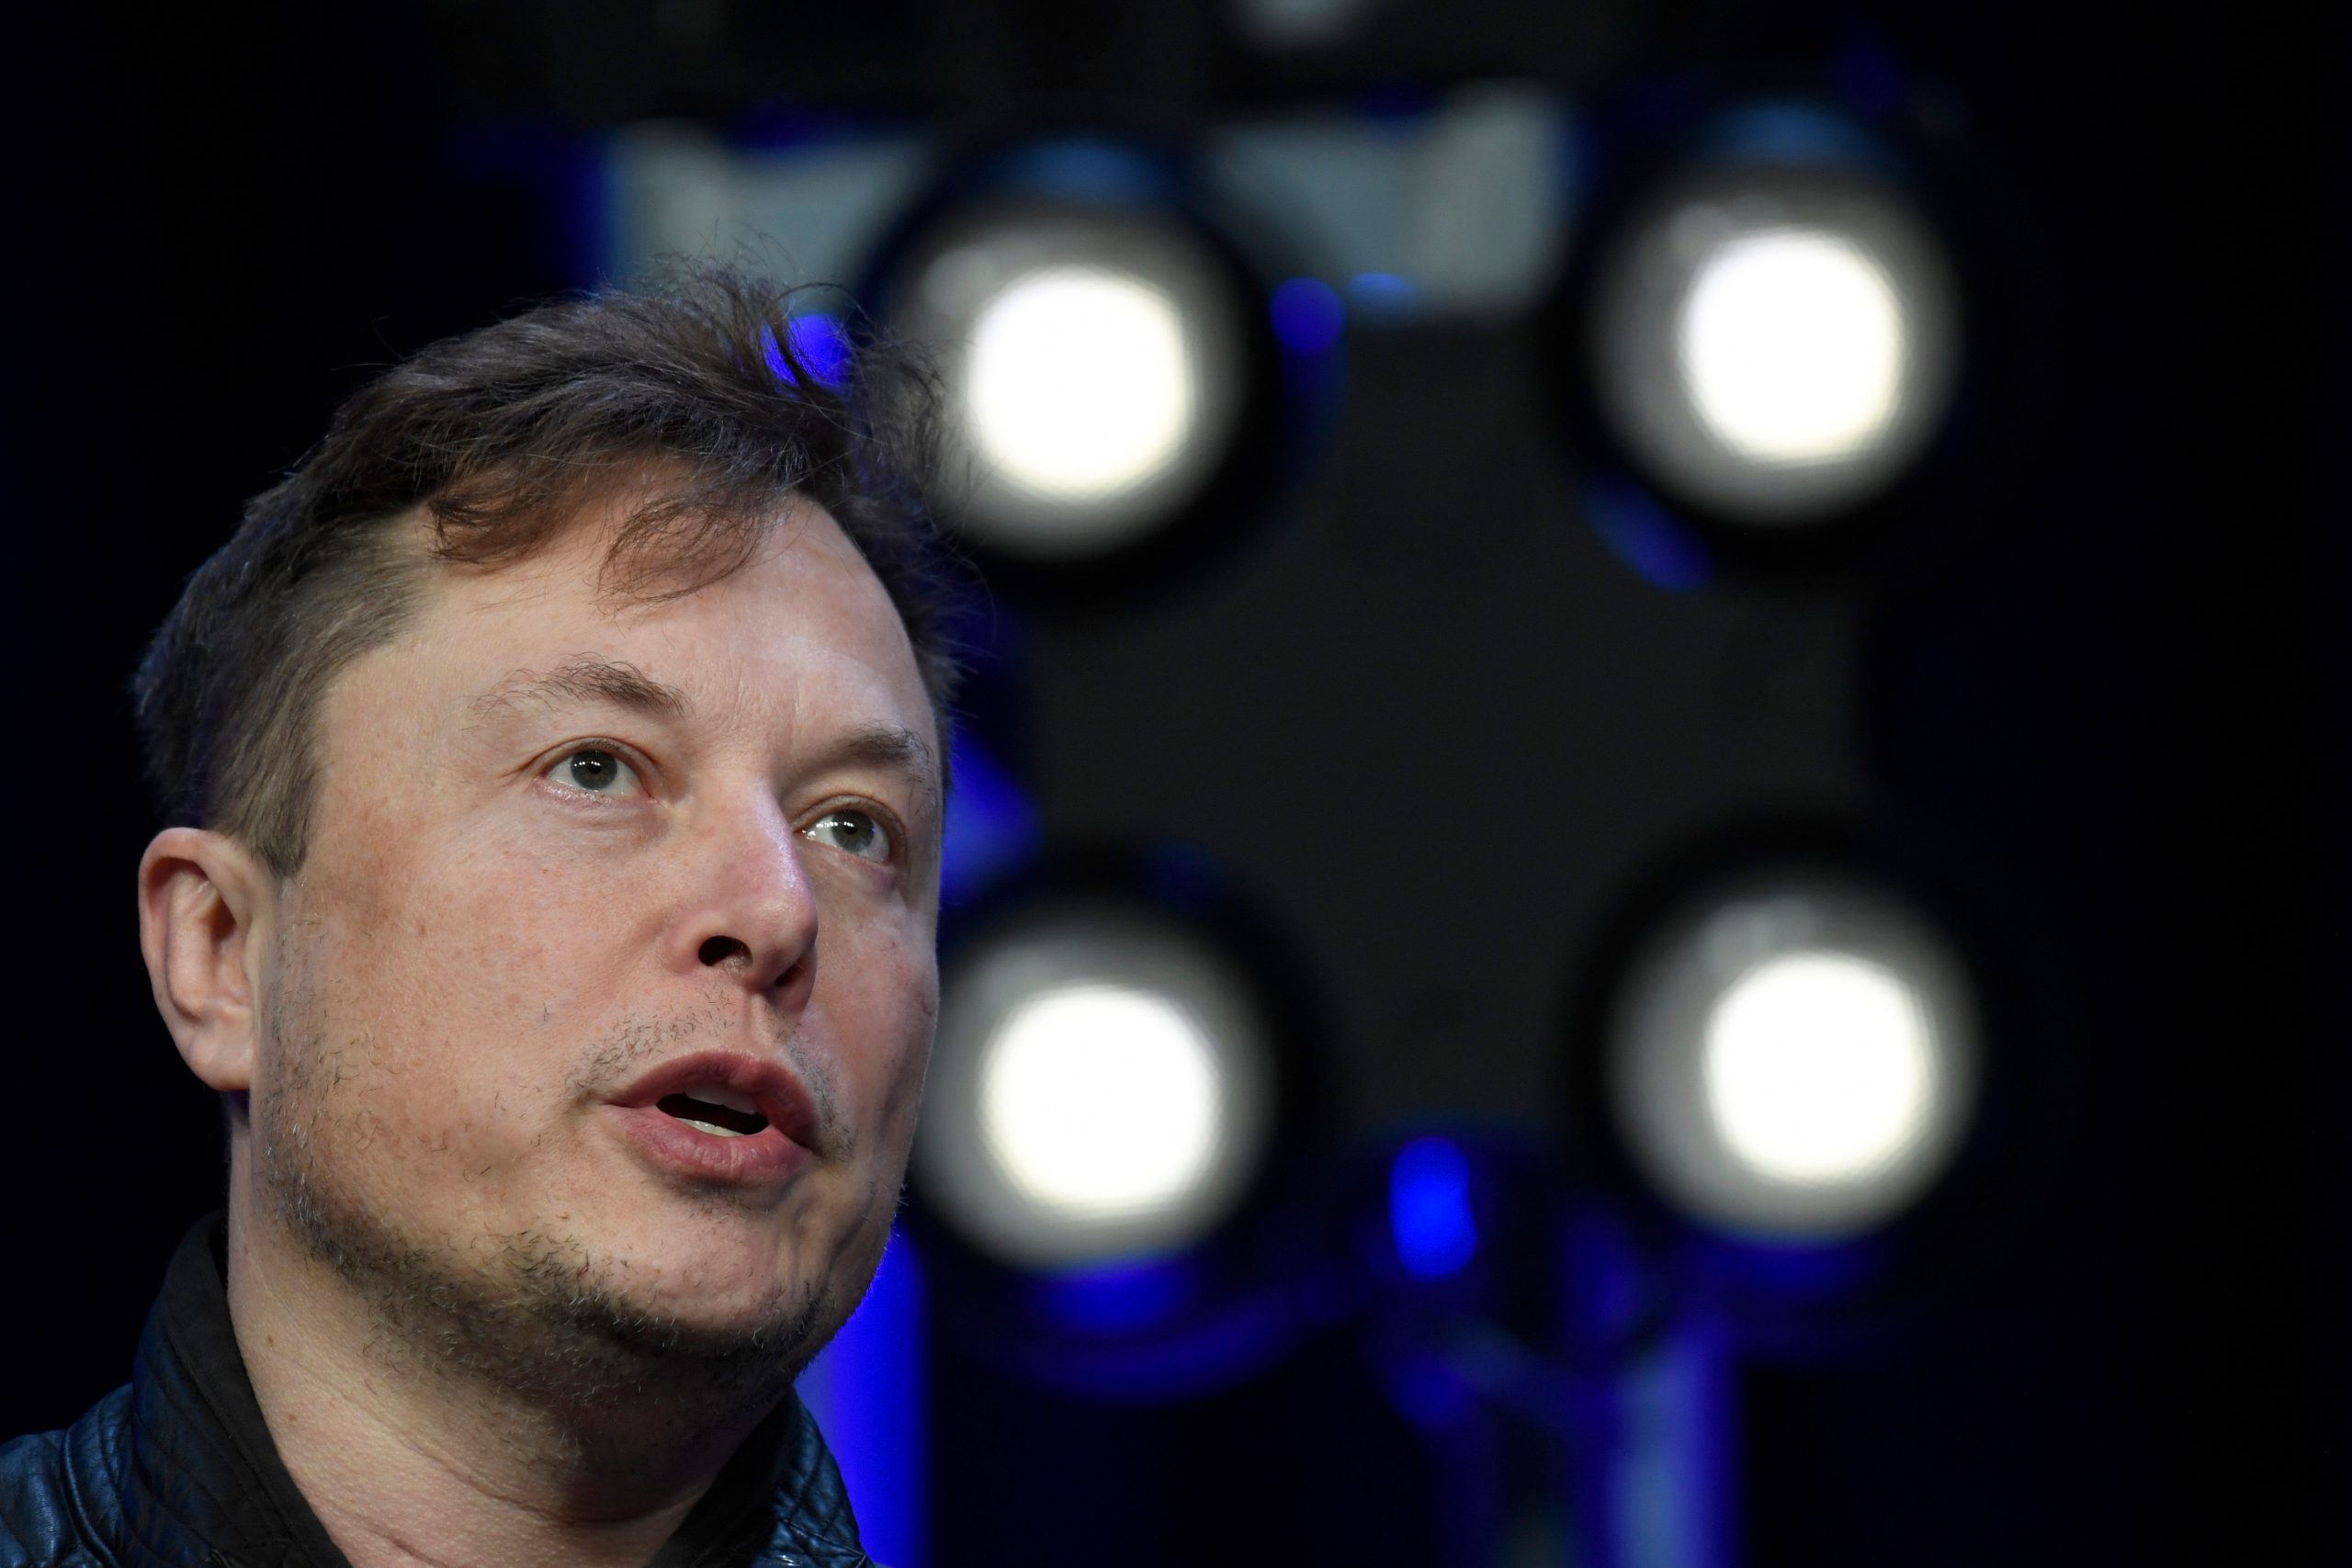 Elon Musk shows users how not to be ‘manipulated’ by Twitter algorithm